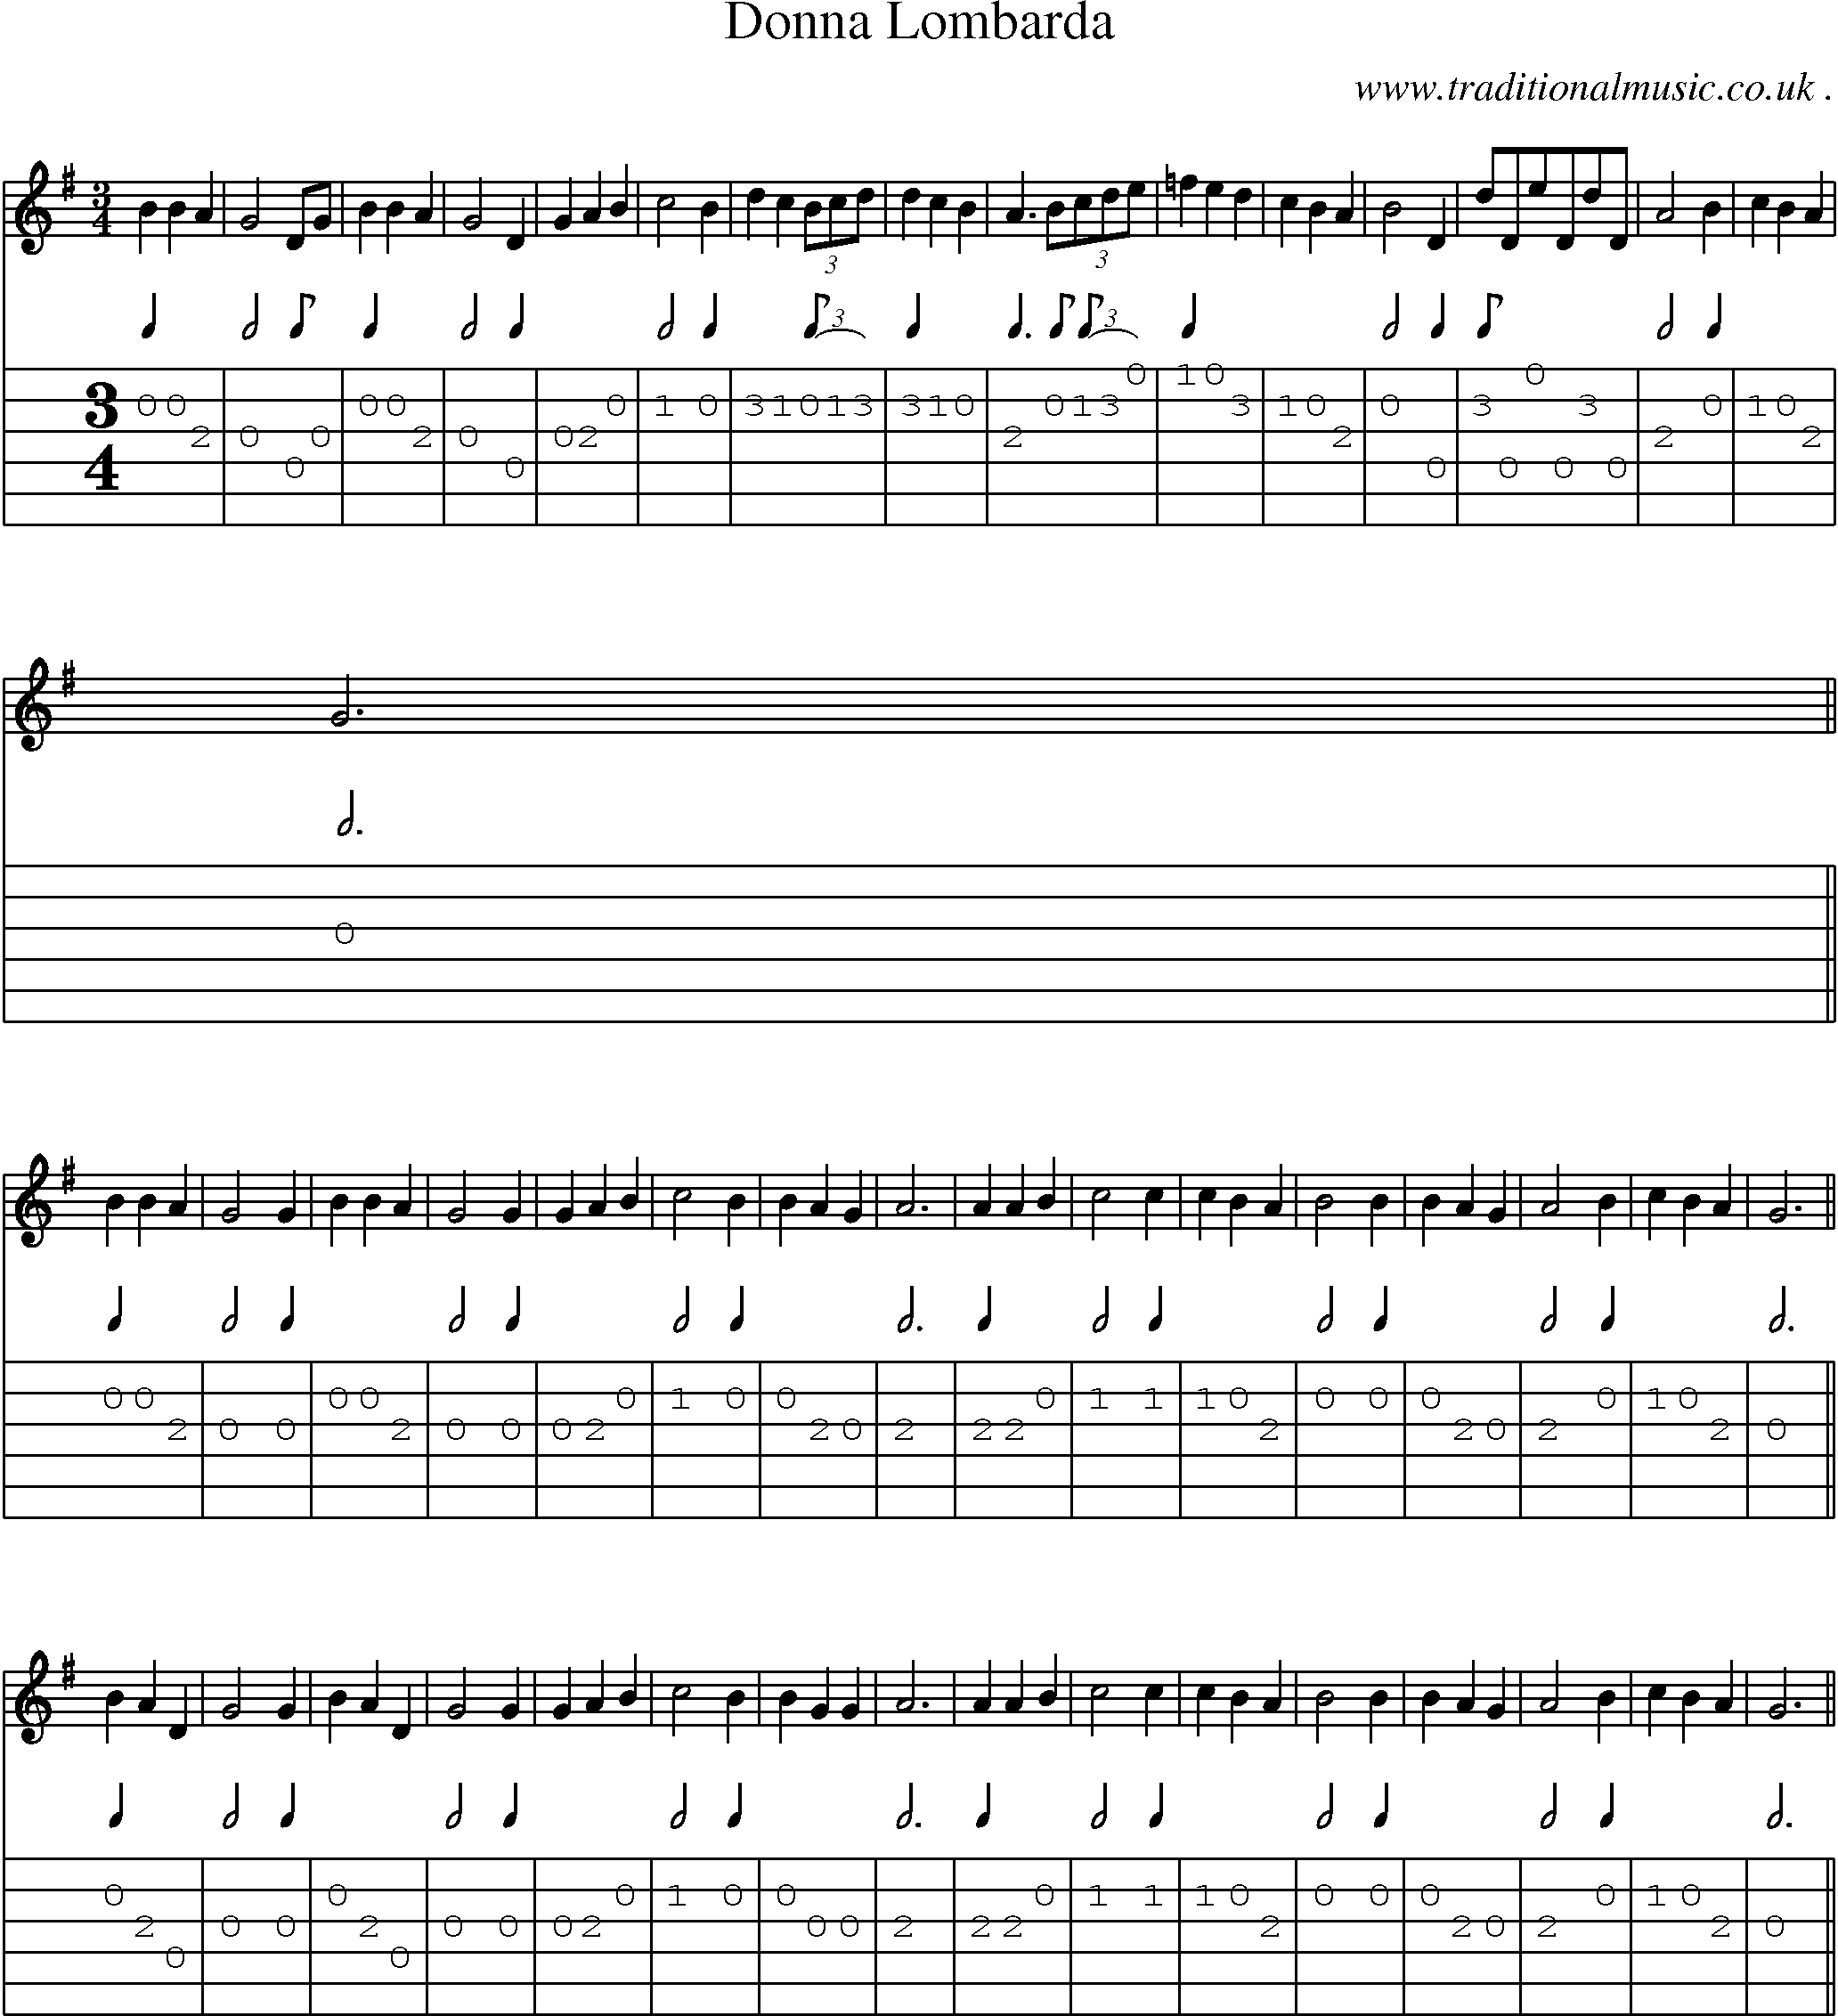 Sheet-Music and Guitar Tabs for Donna Lombarda